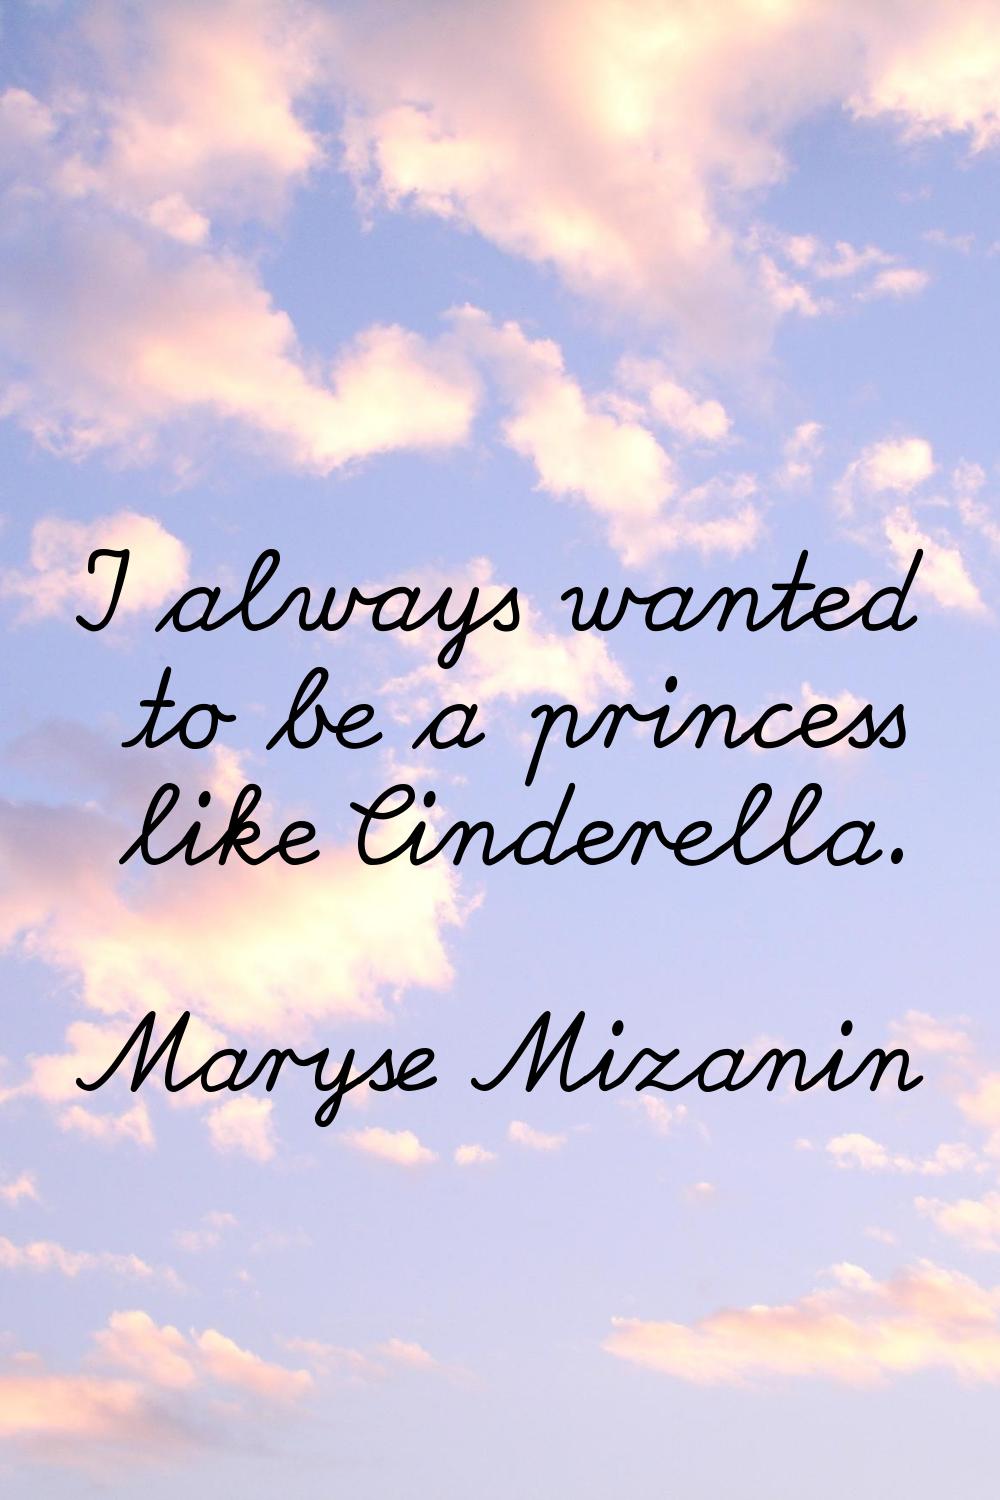 I always wanted to be a princess like Cinderella.